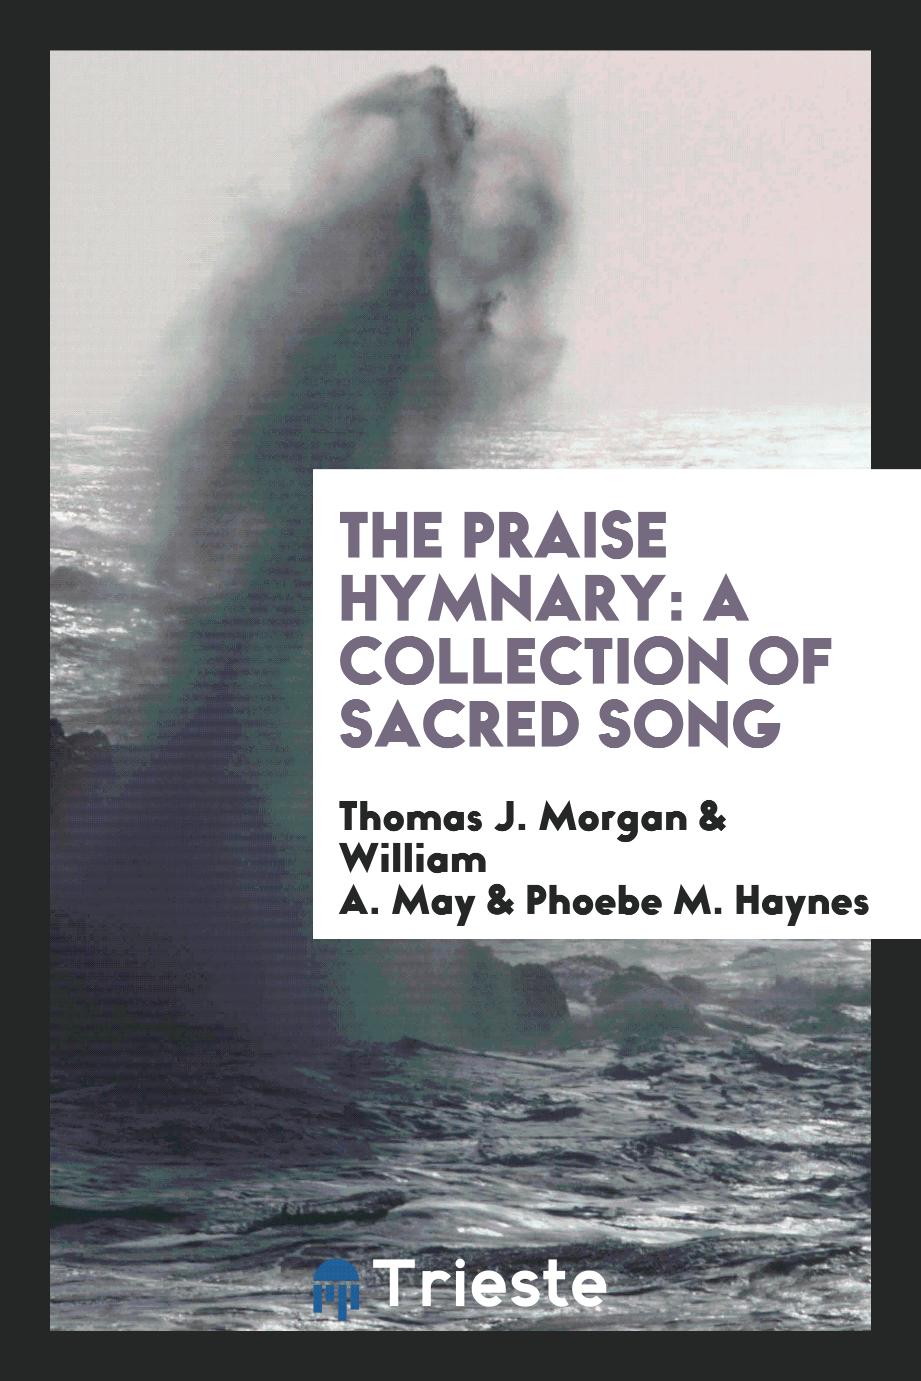 The praise hymnary: a collection of sacred song